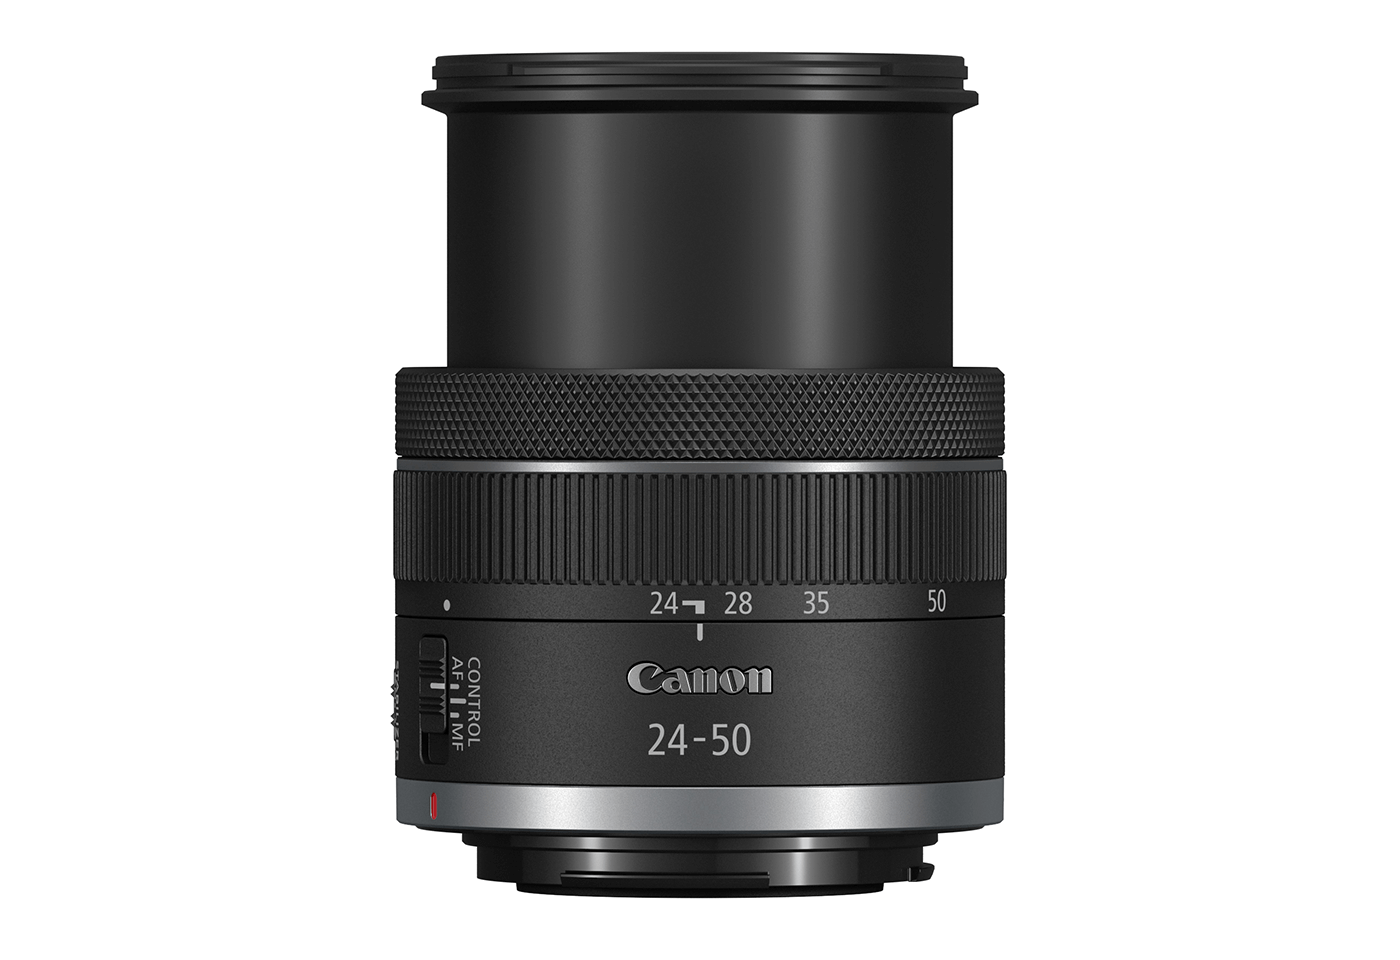 RF 24-50mm f/4.5-6.3 IS STM: Compact RF Standard Zoom lens | Canon